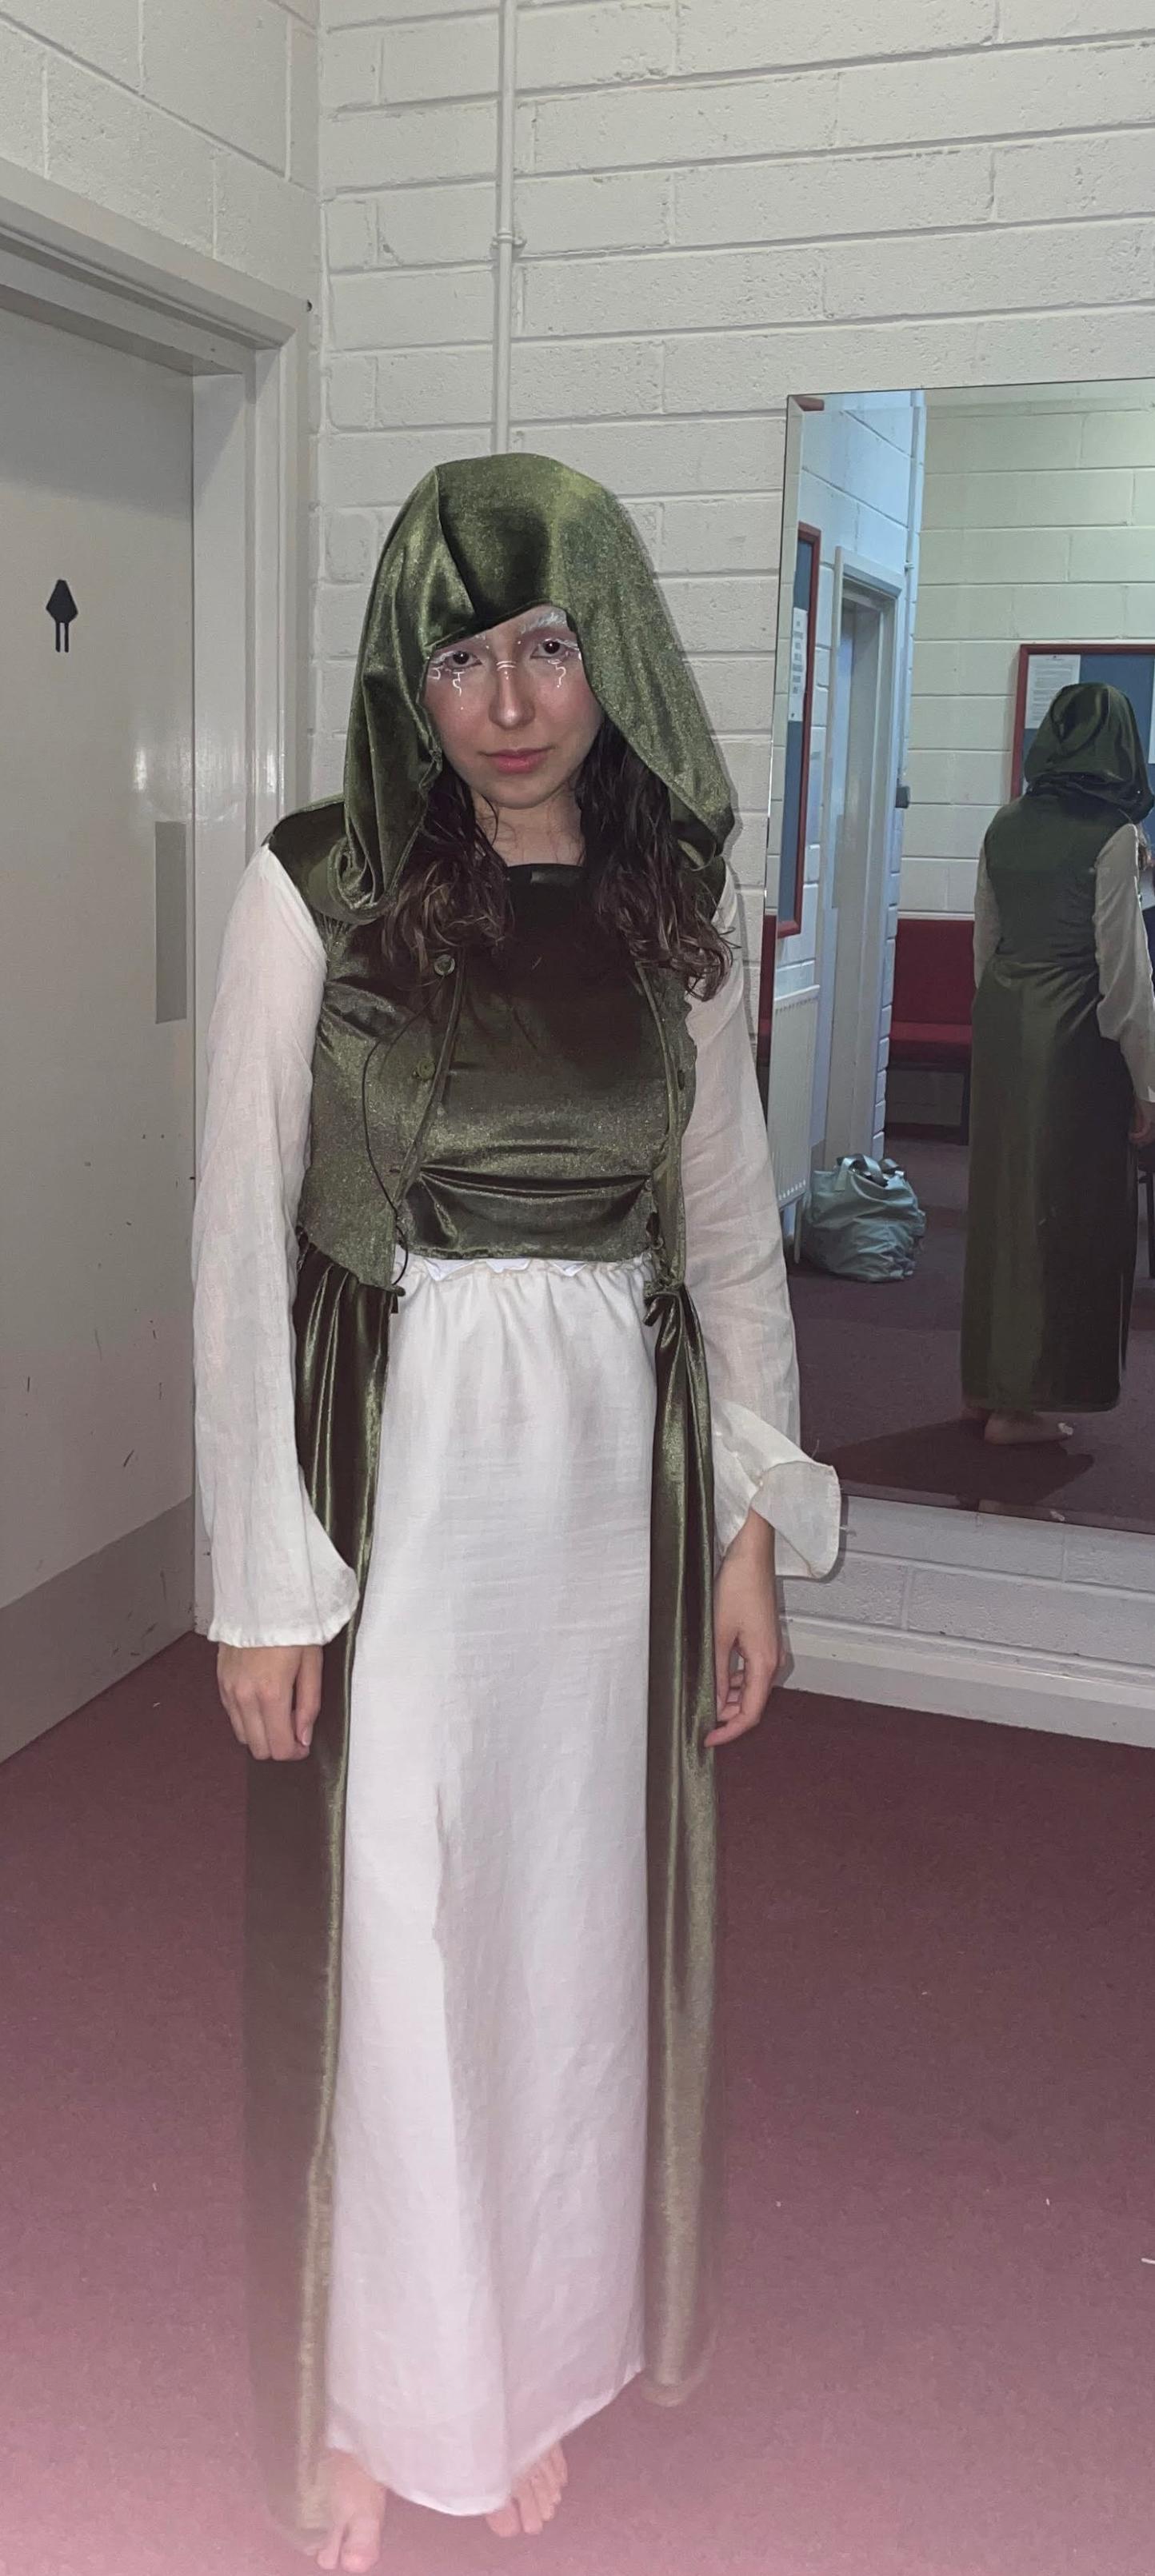 Student in green and white costume with hood. Long brown hair frames her face as she stares at the camera.